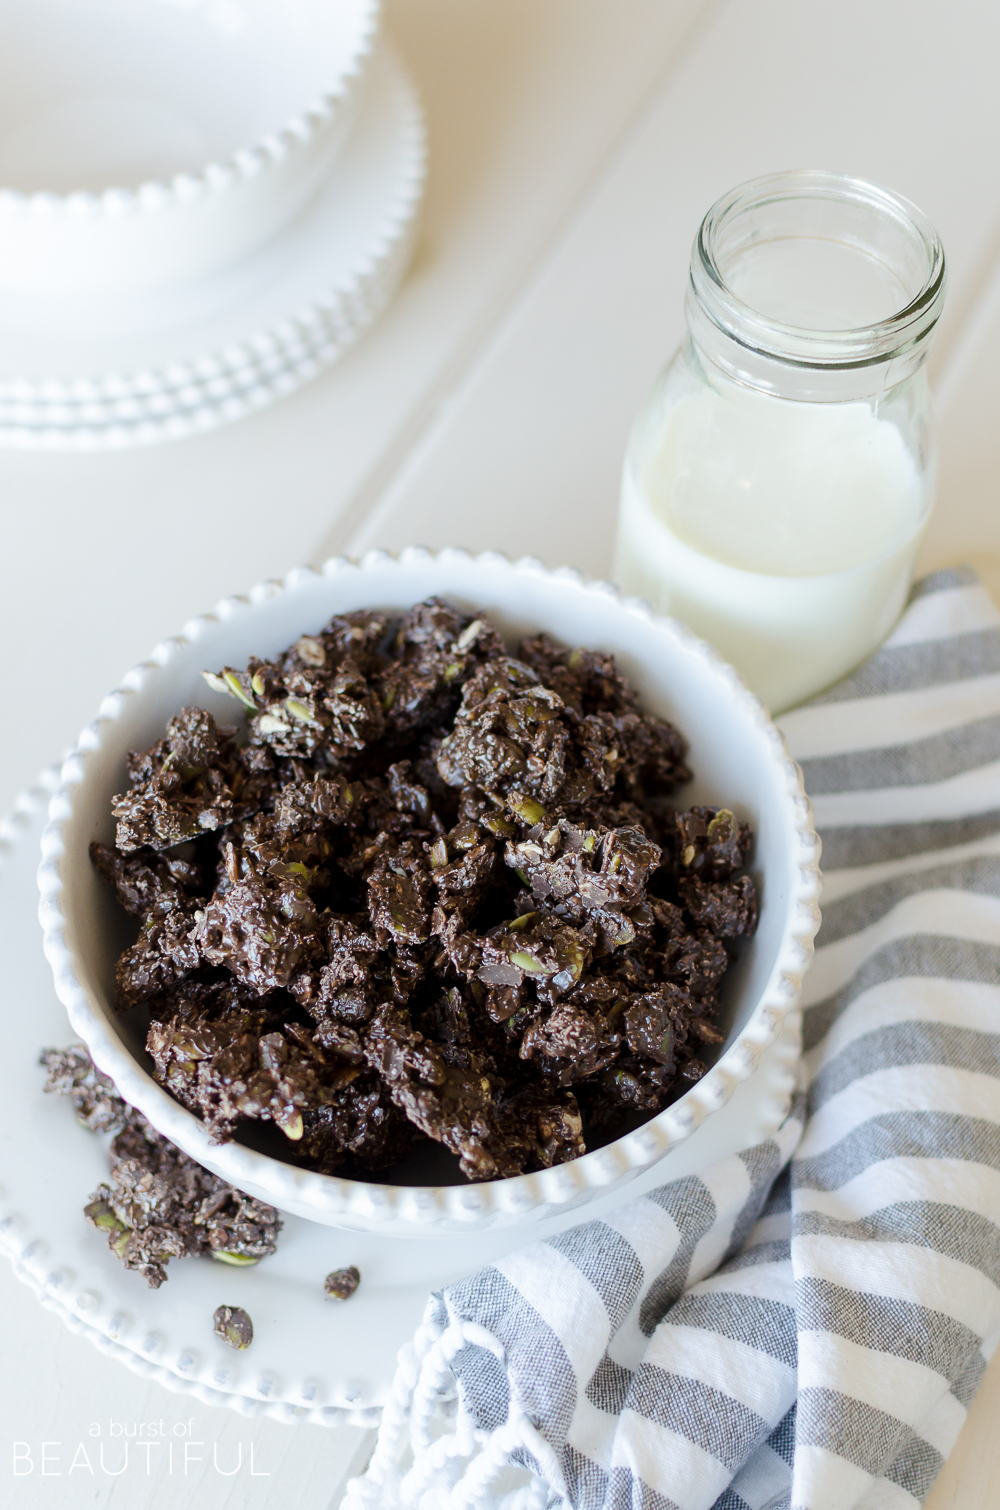 Healthy dark chocolate bites made with dark chocolate, sunflower seeds, pumpkin seeds and coconut are a perfectly satisfying and healthy snack.